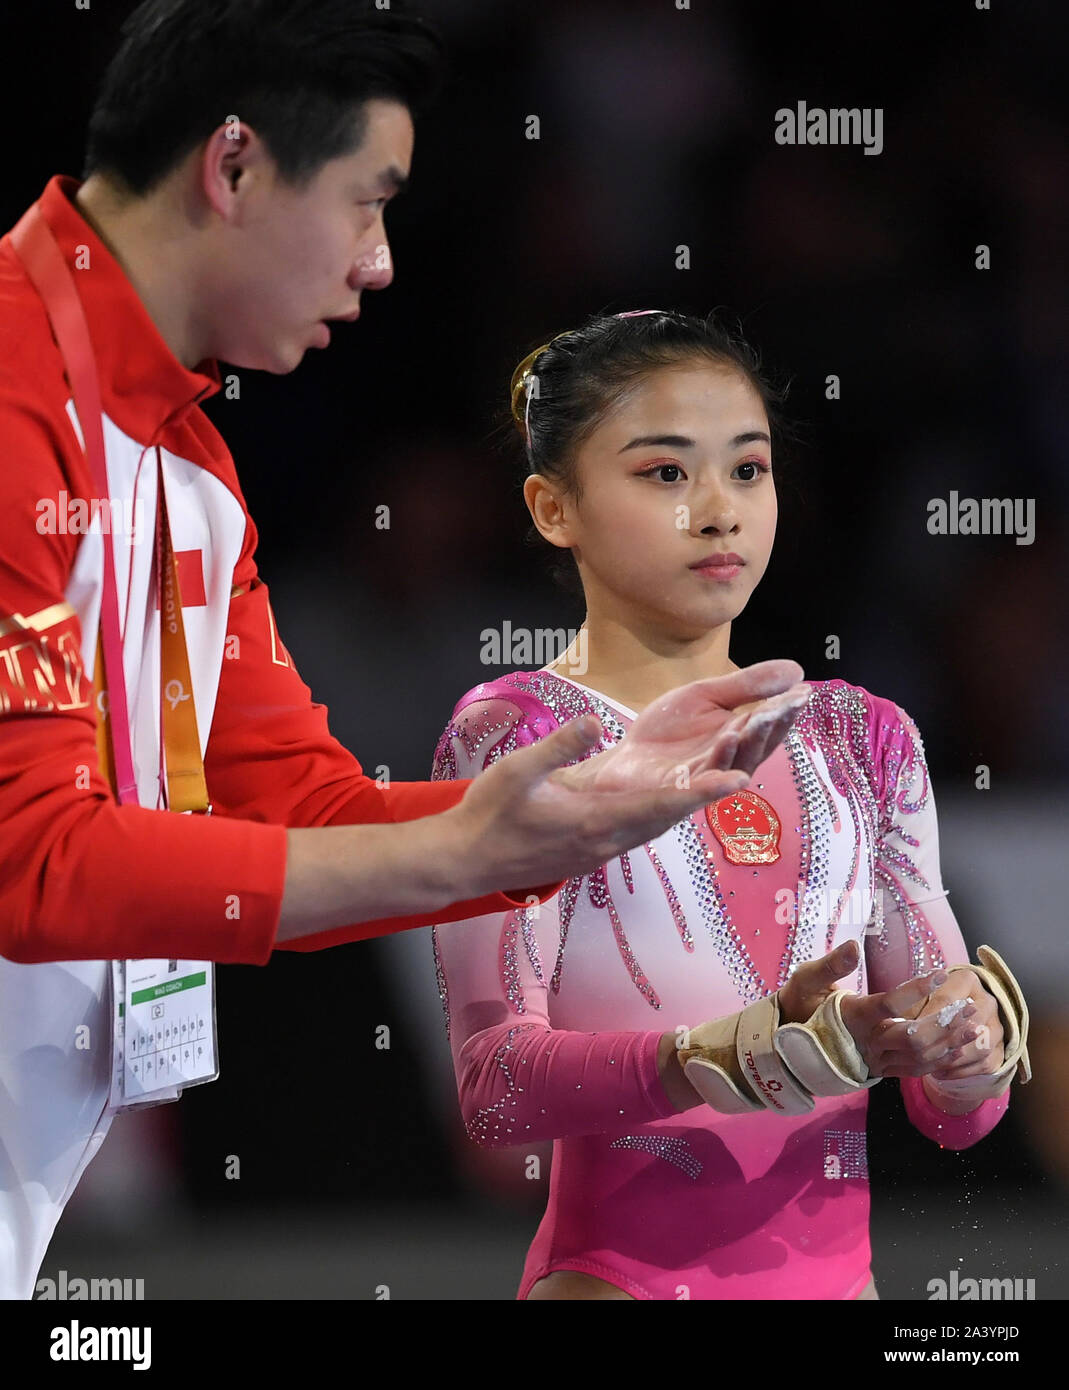 Stuttgart, Germany. 10th Oct, 2019. Chinese gymnast Li Shijia (R) receives  advices from her coach during the Women's All-Around Final of the 2019 FIG  Artistic Gymnastics World Championships in Stuttgart, Germany, Oct.